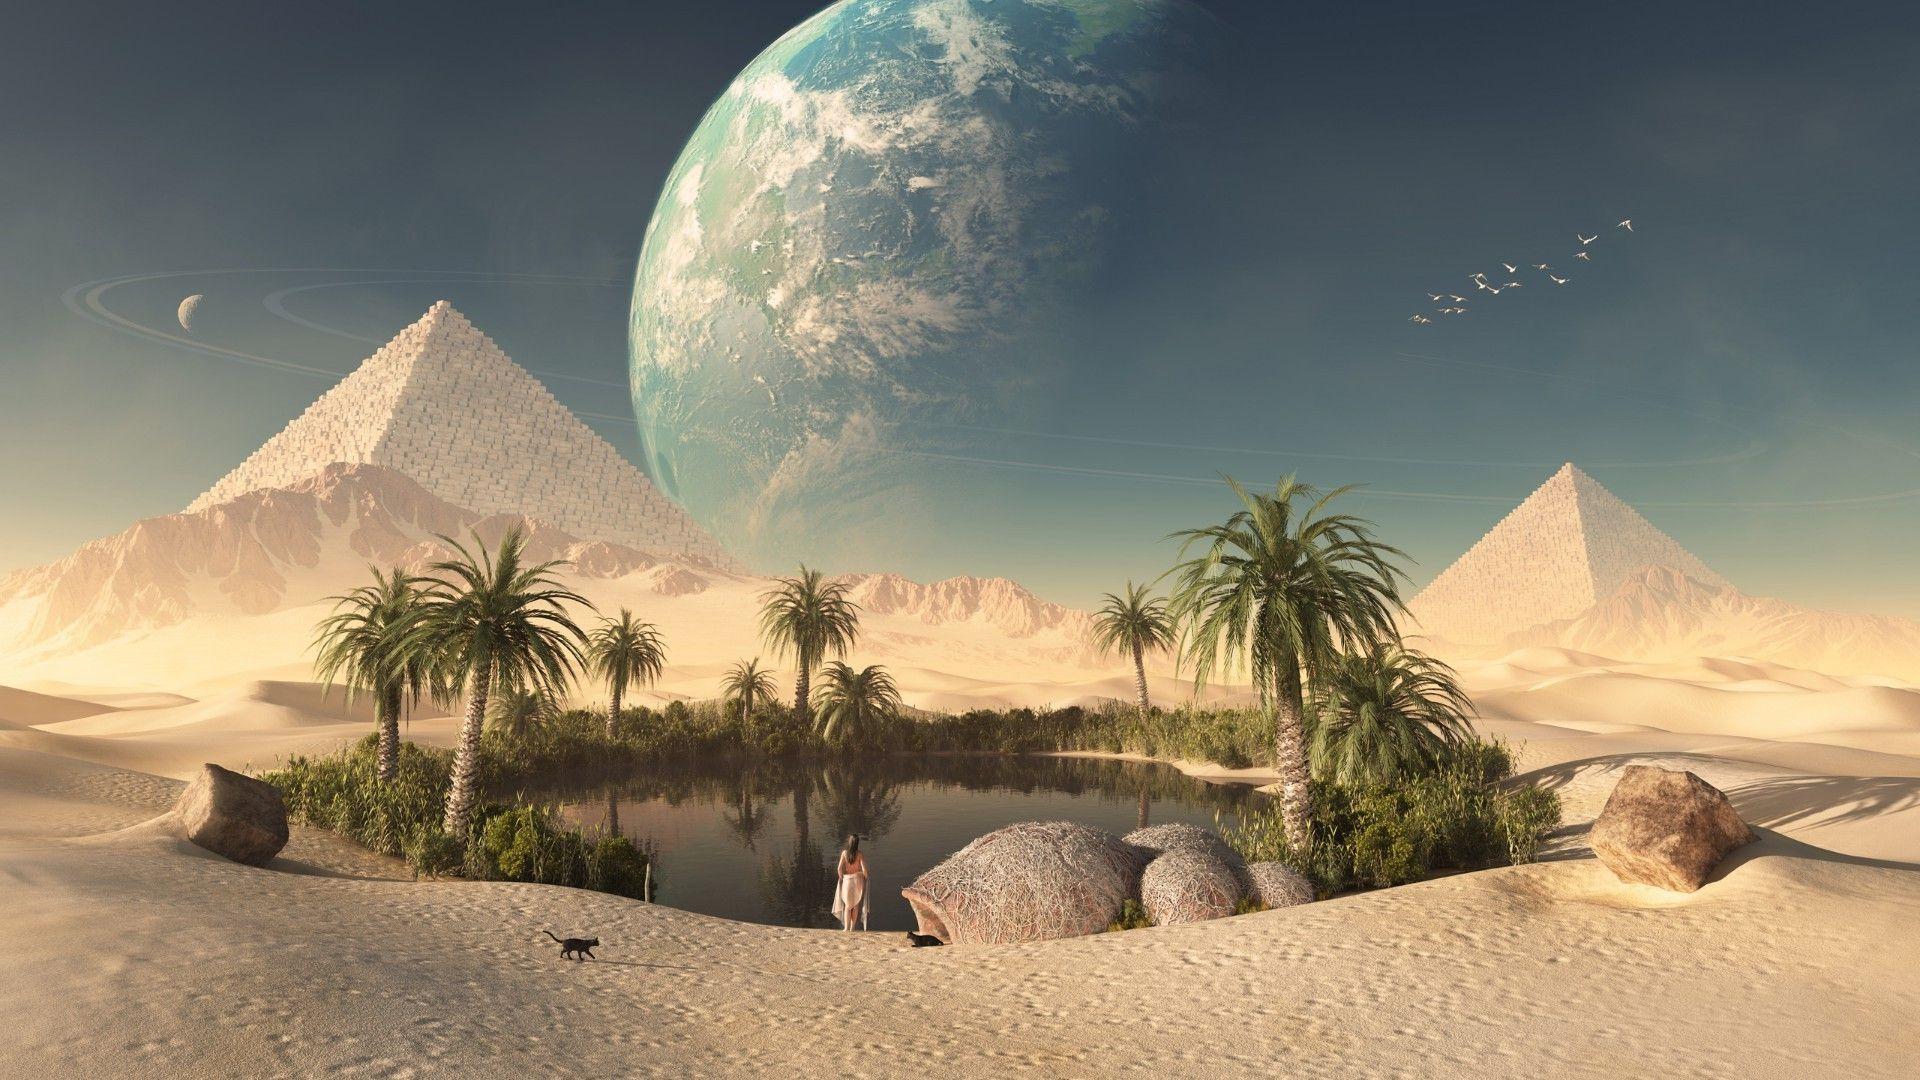 An oasis in the desert to the pyramids in Egypt. Desktop wallpaper